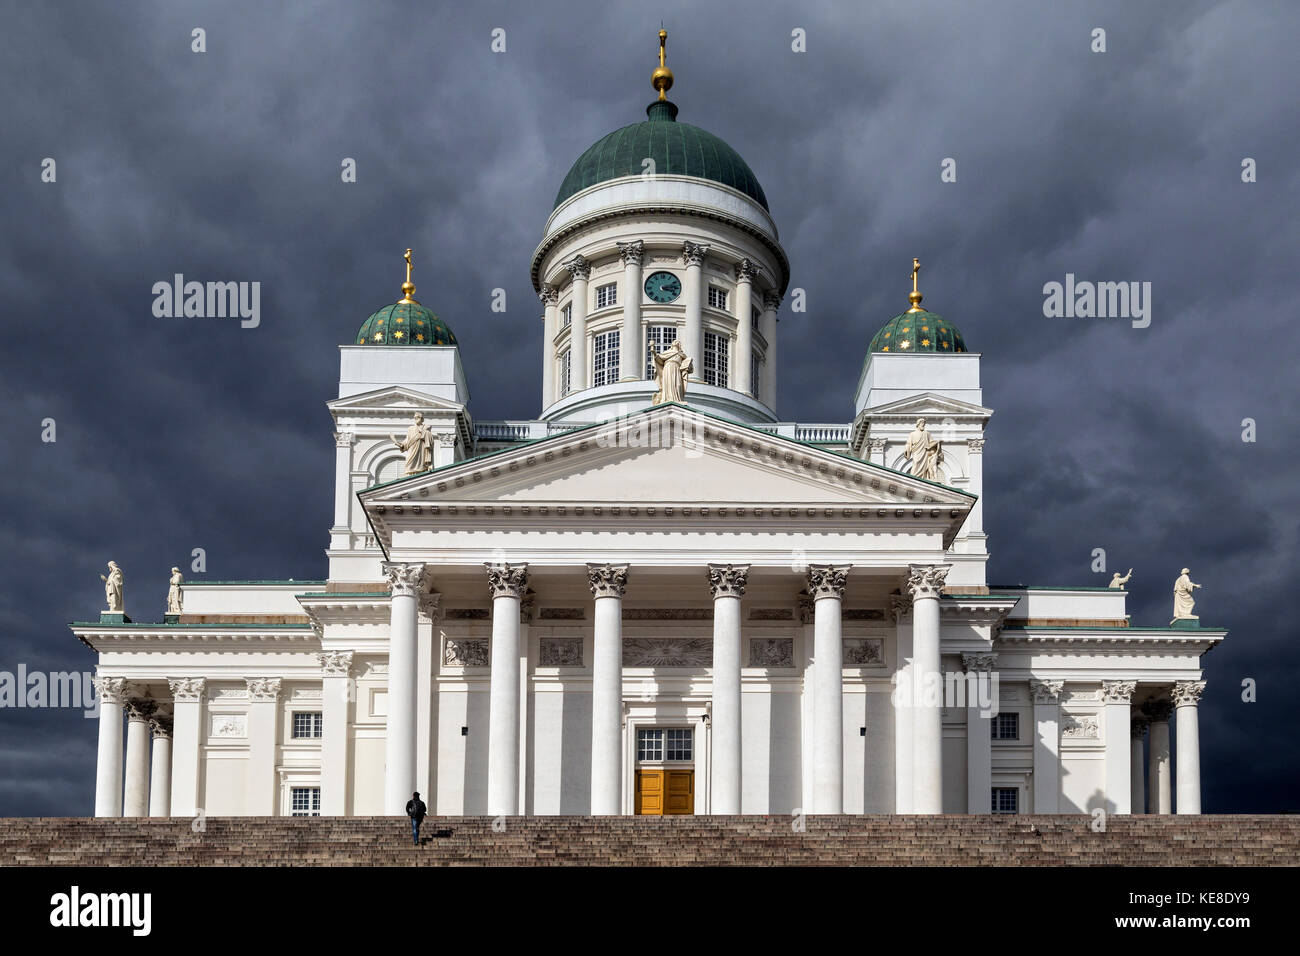 Helsinki Cathedral in Senate Square in Helsinki, Finland. The church was built between 1830-1852 as a tribute to the Grand Duke of Finland, Tsar Nicho Stock Photo